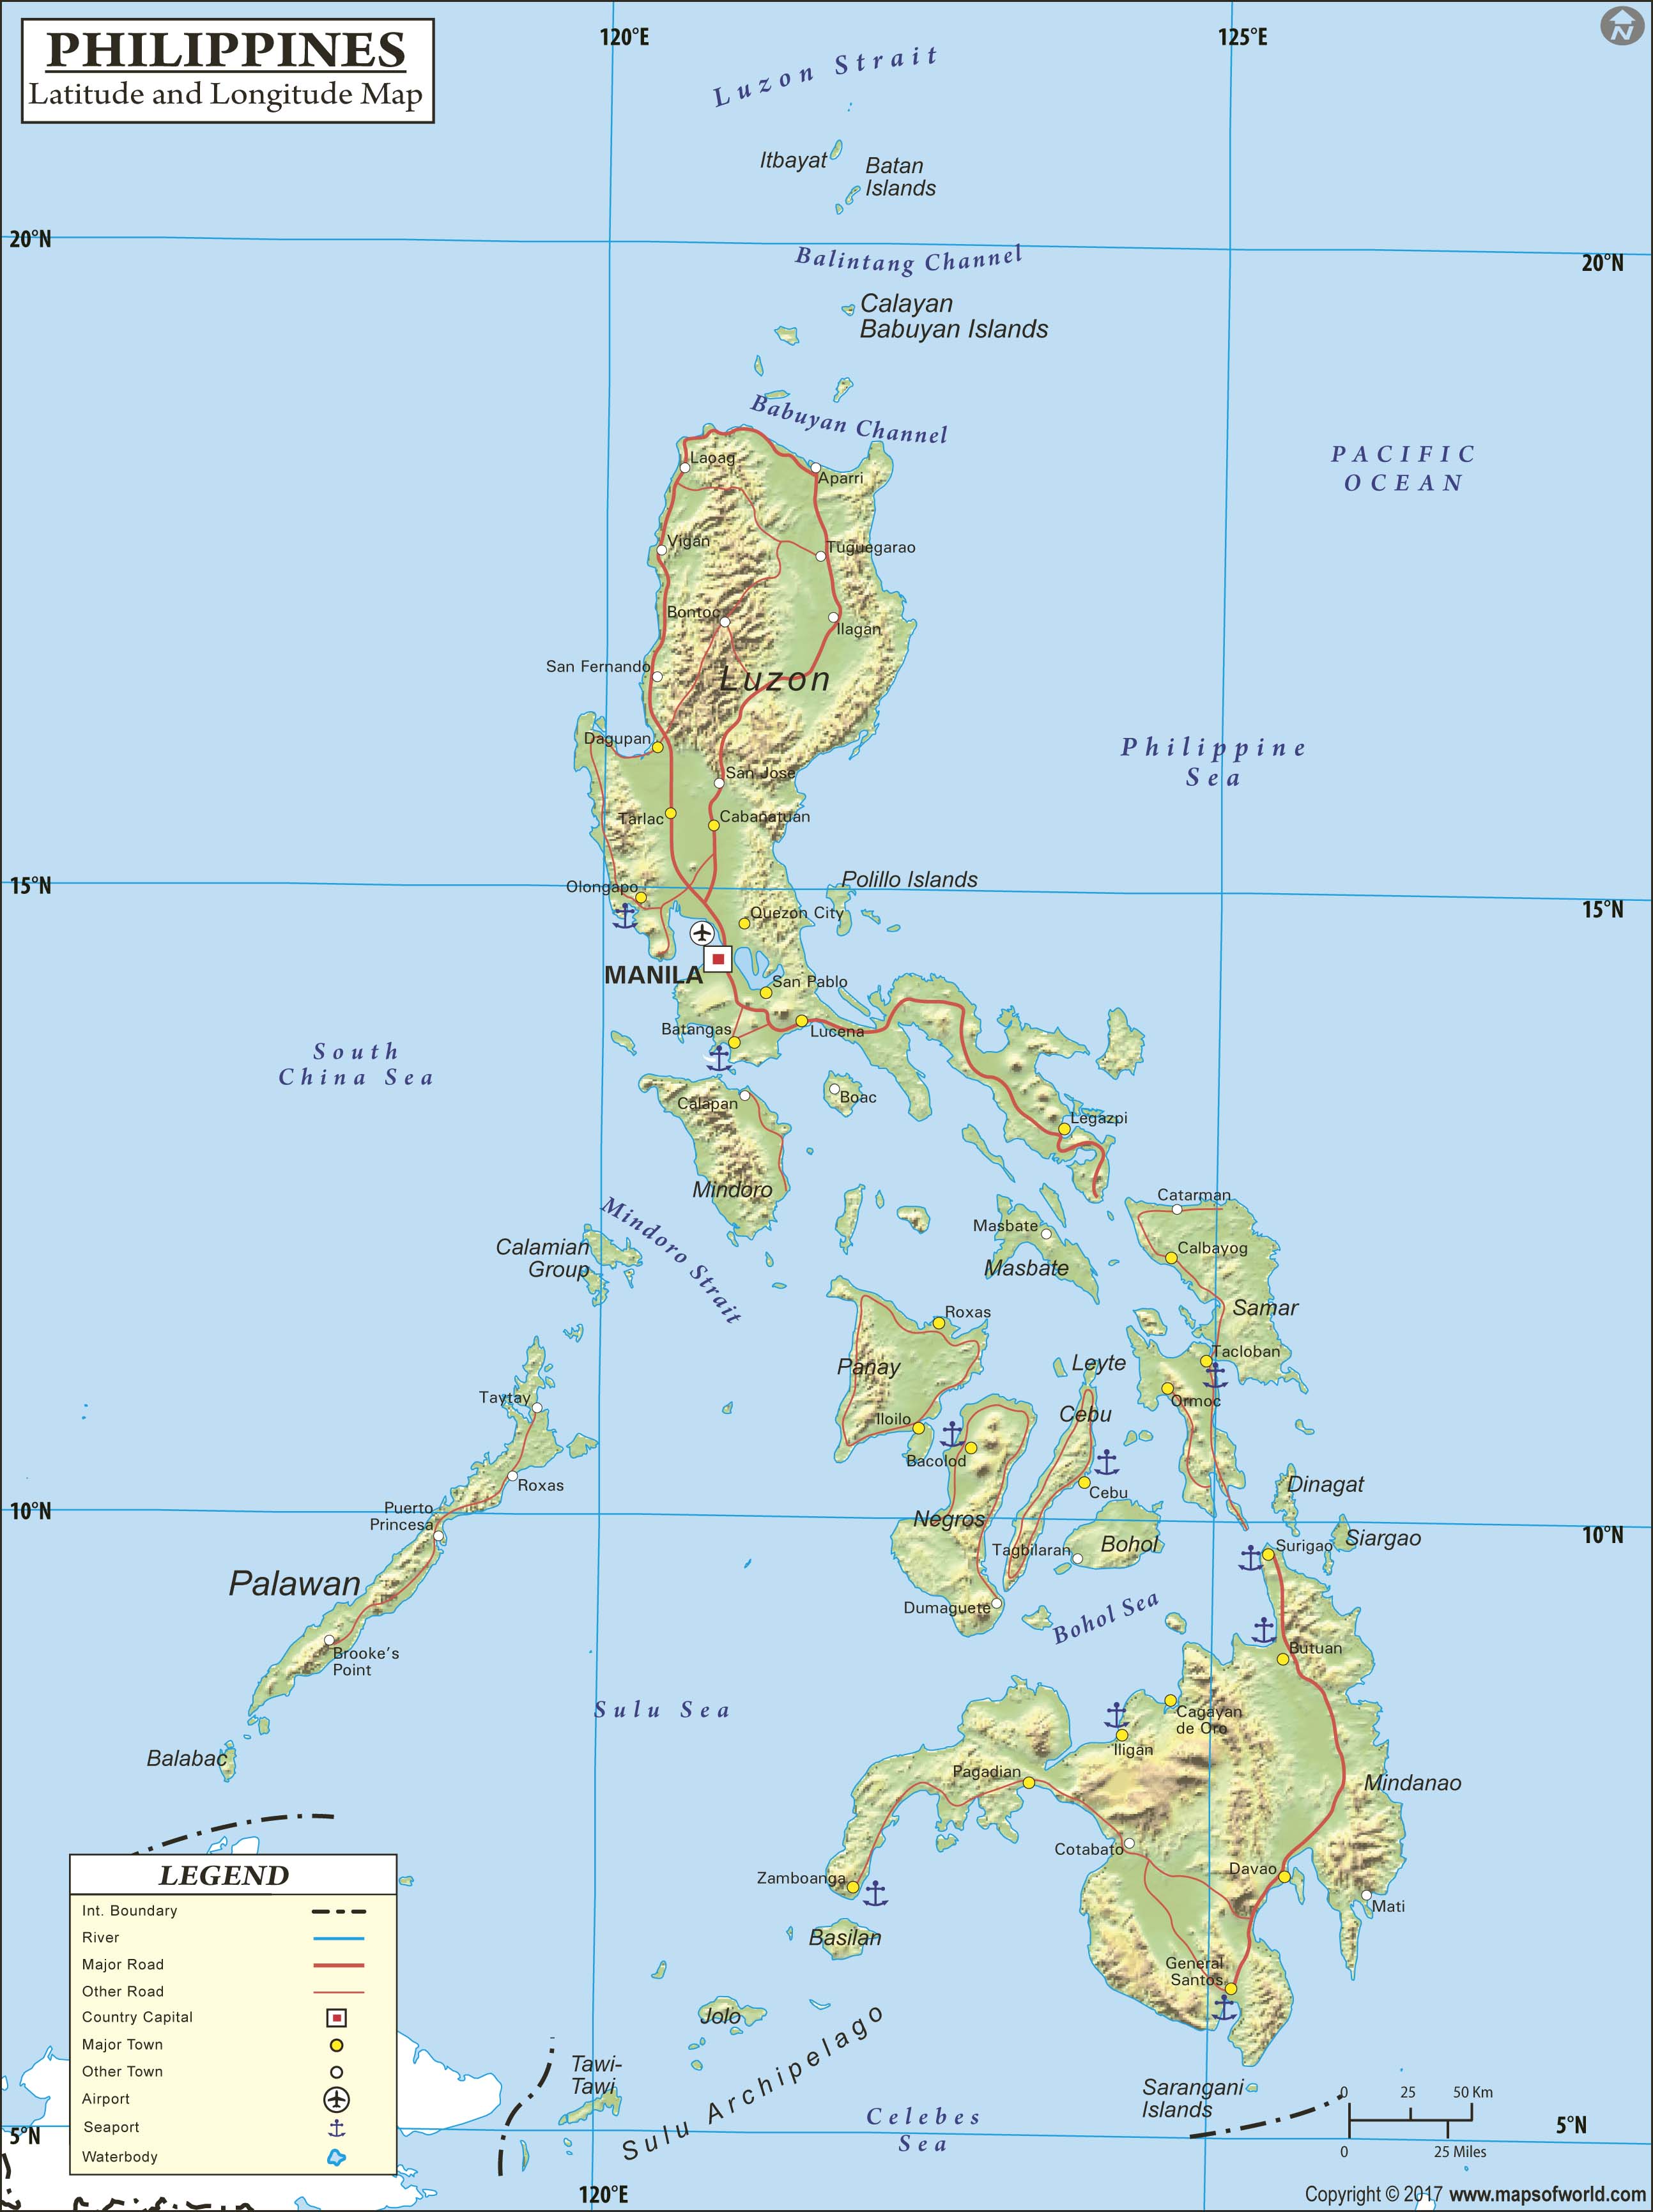 Philippines Latitude and Longitude Wall Map by Maps of World - MapSales